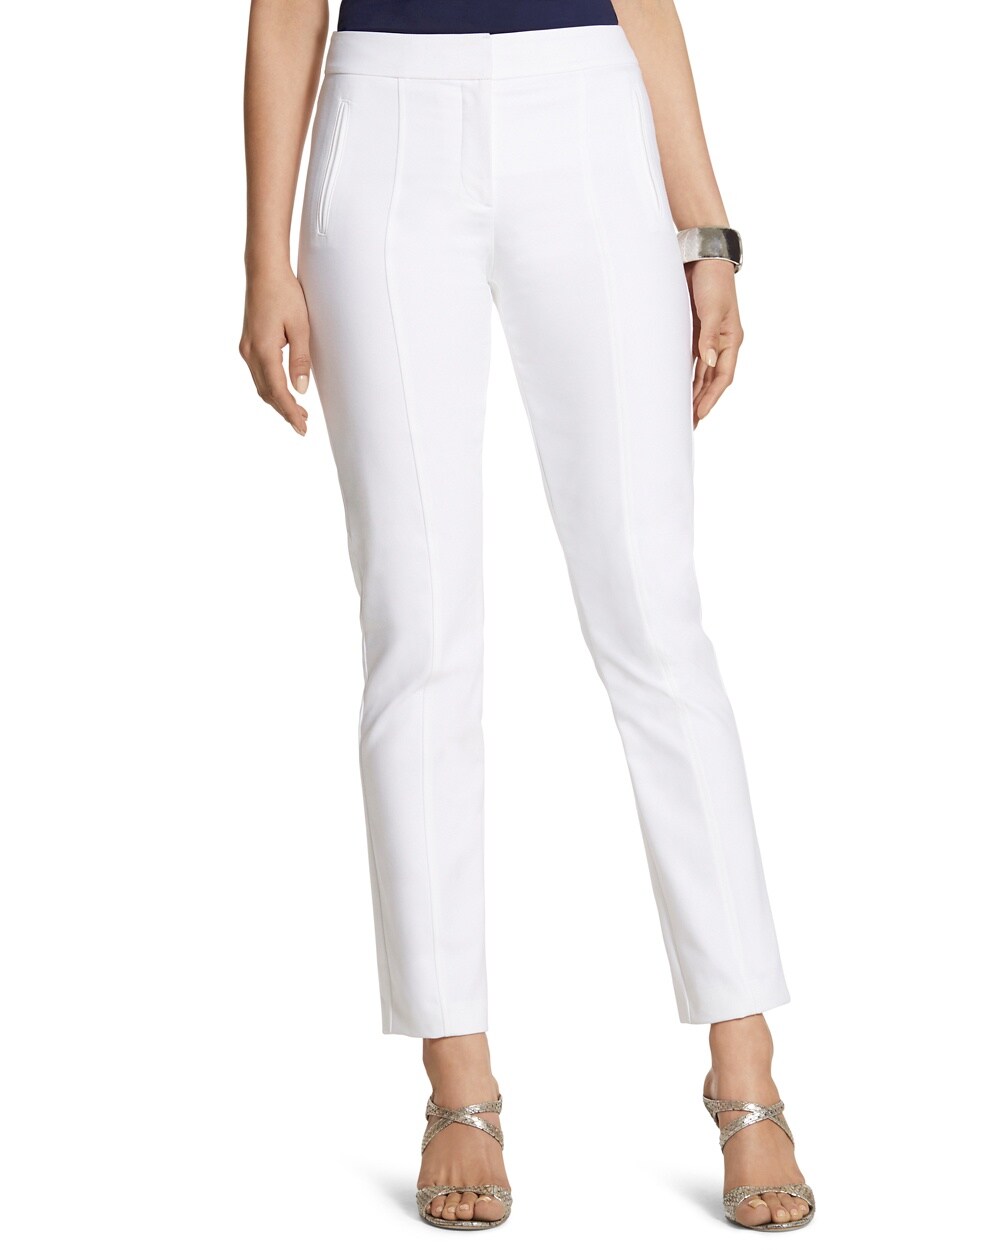 UPC 451005523047 - Chicos Womens White So Slimming Audrey Ankle Pant ...